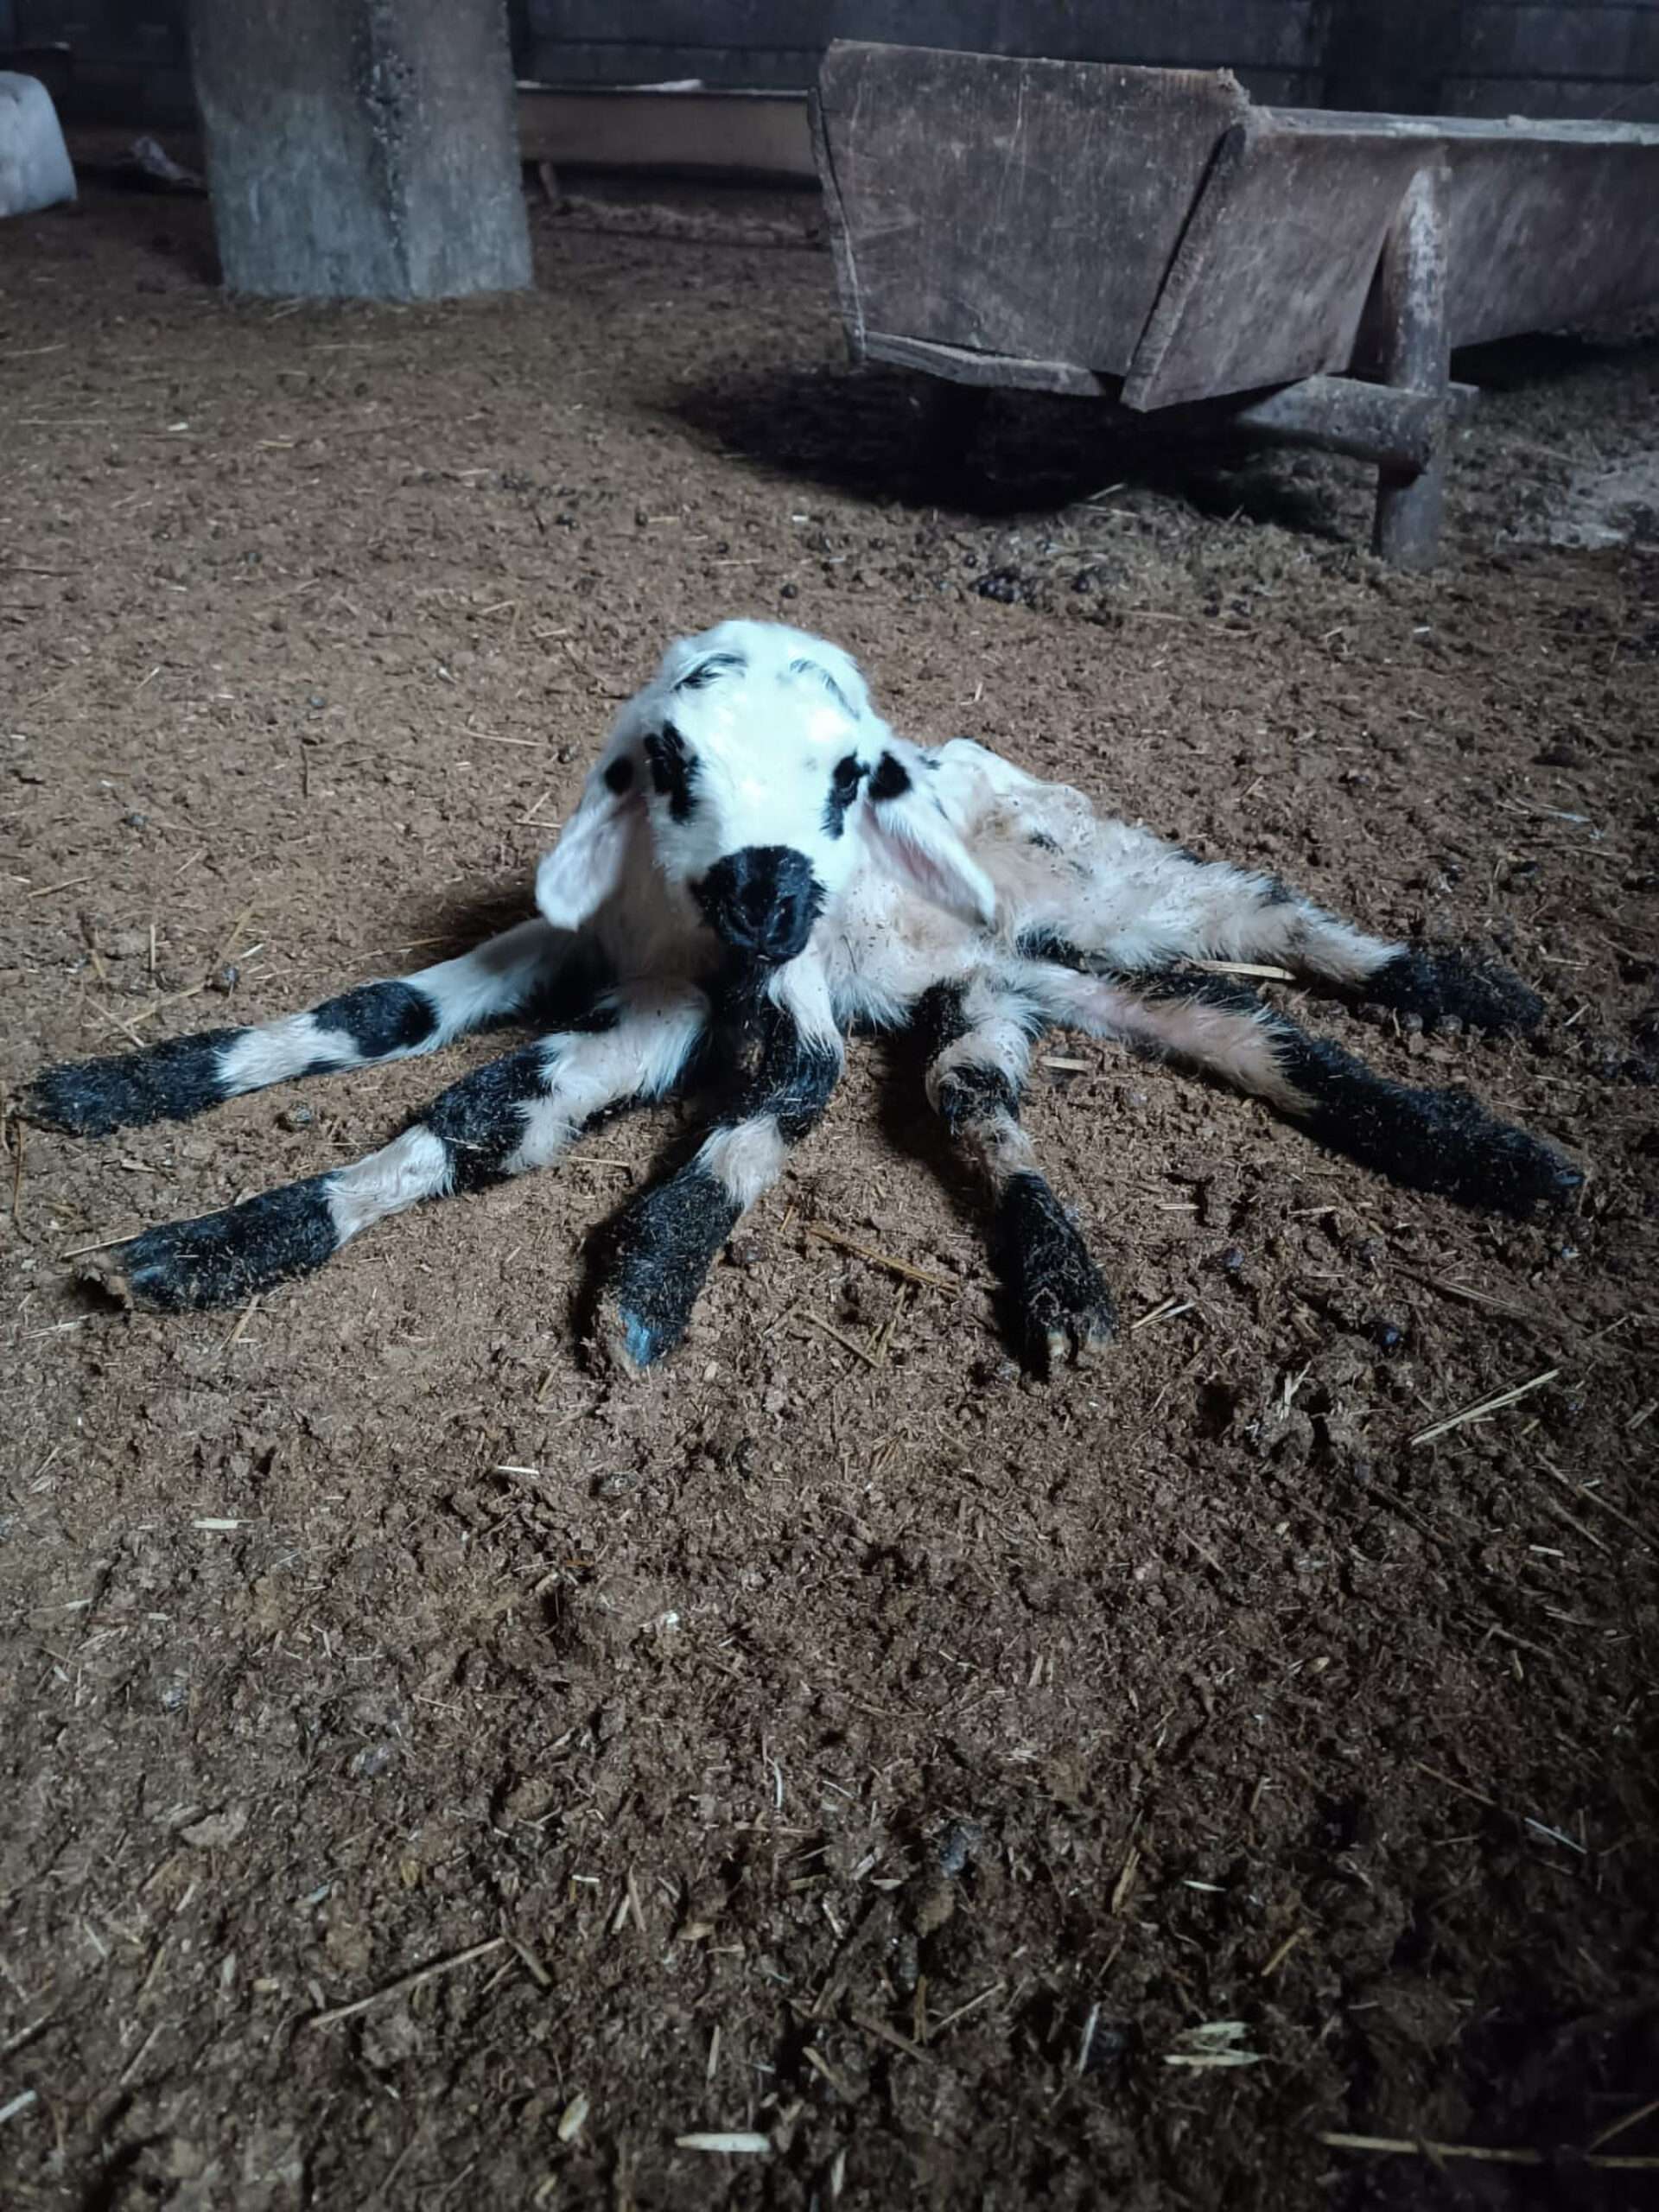 Read more about the article SPIDER-LAMB: Mutant Six-Legged Sheep